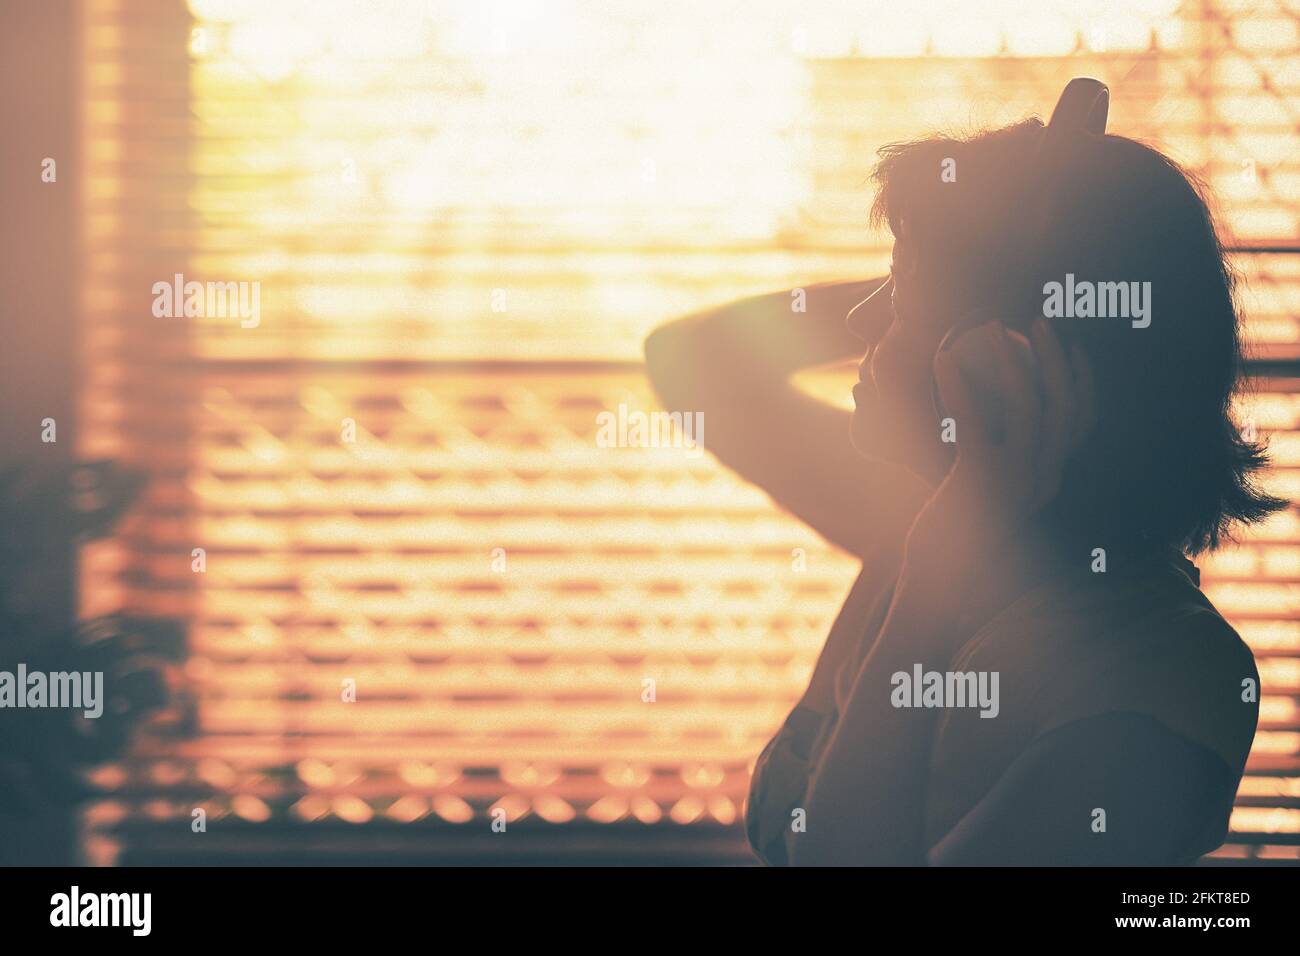 A silhouette of woman with Headphone or Headset on her head with the window and sunlight on background. Stock Photo